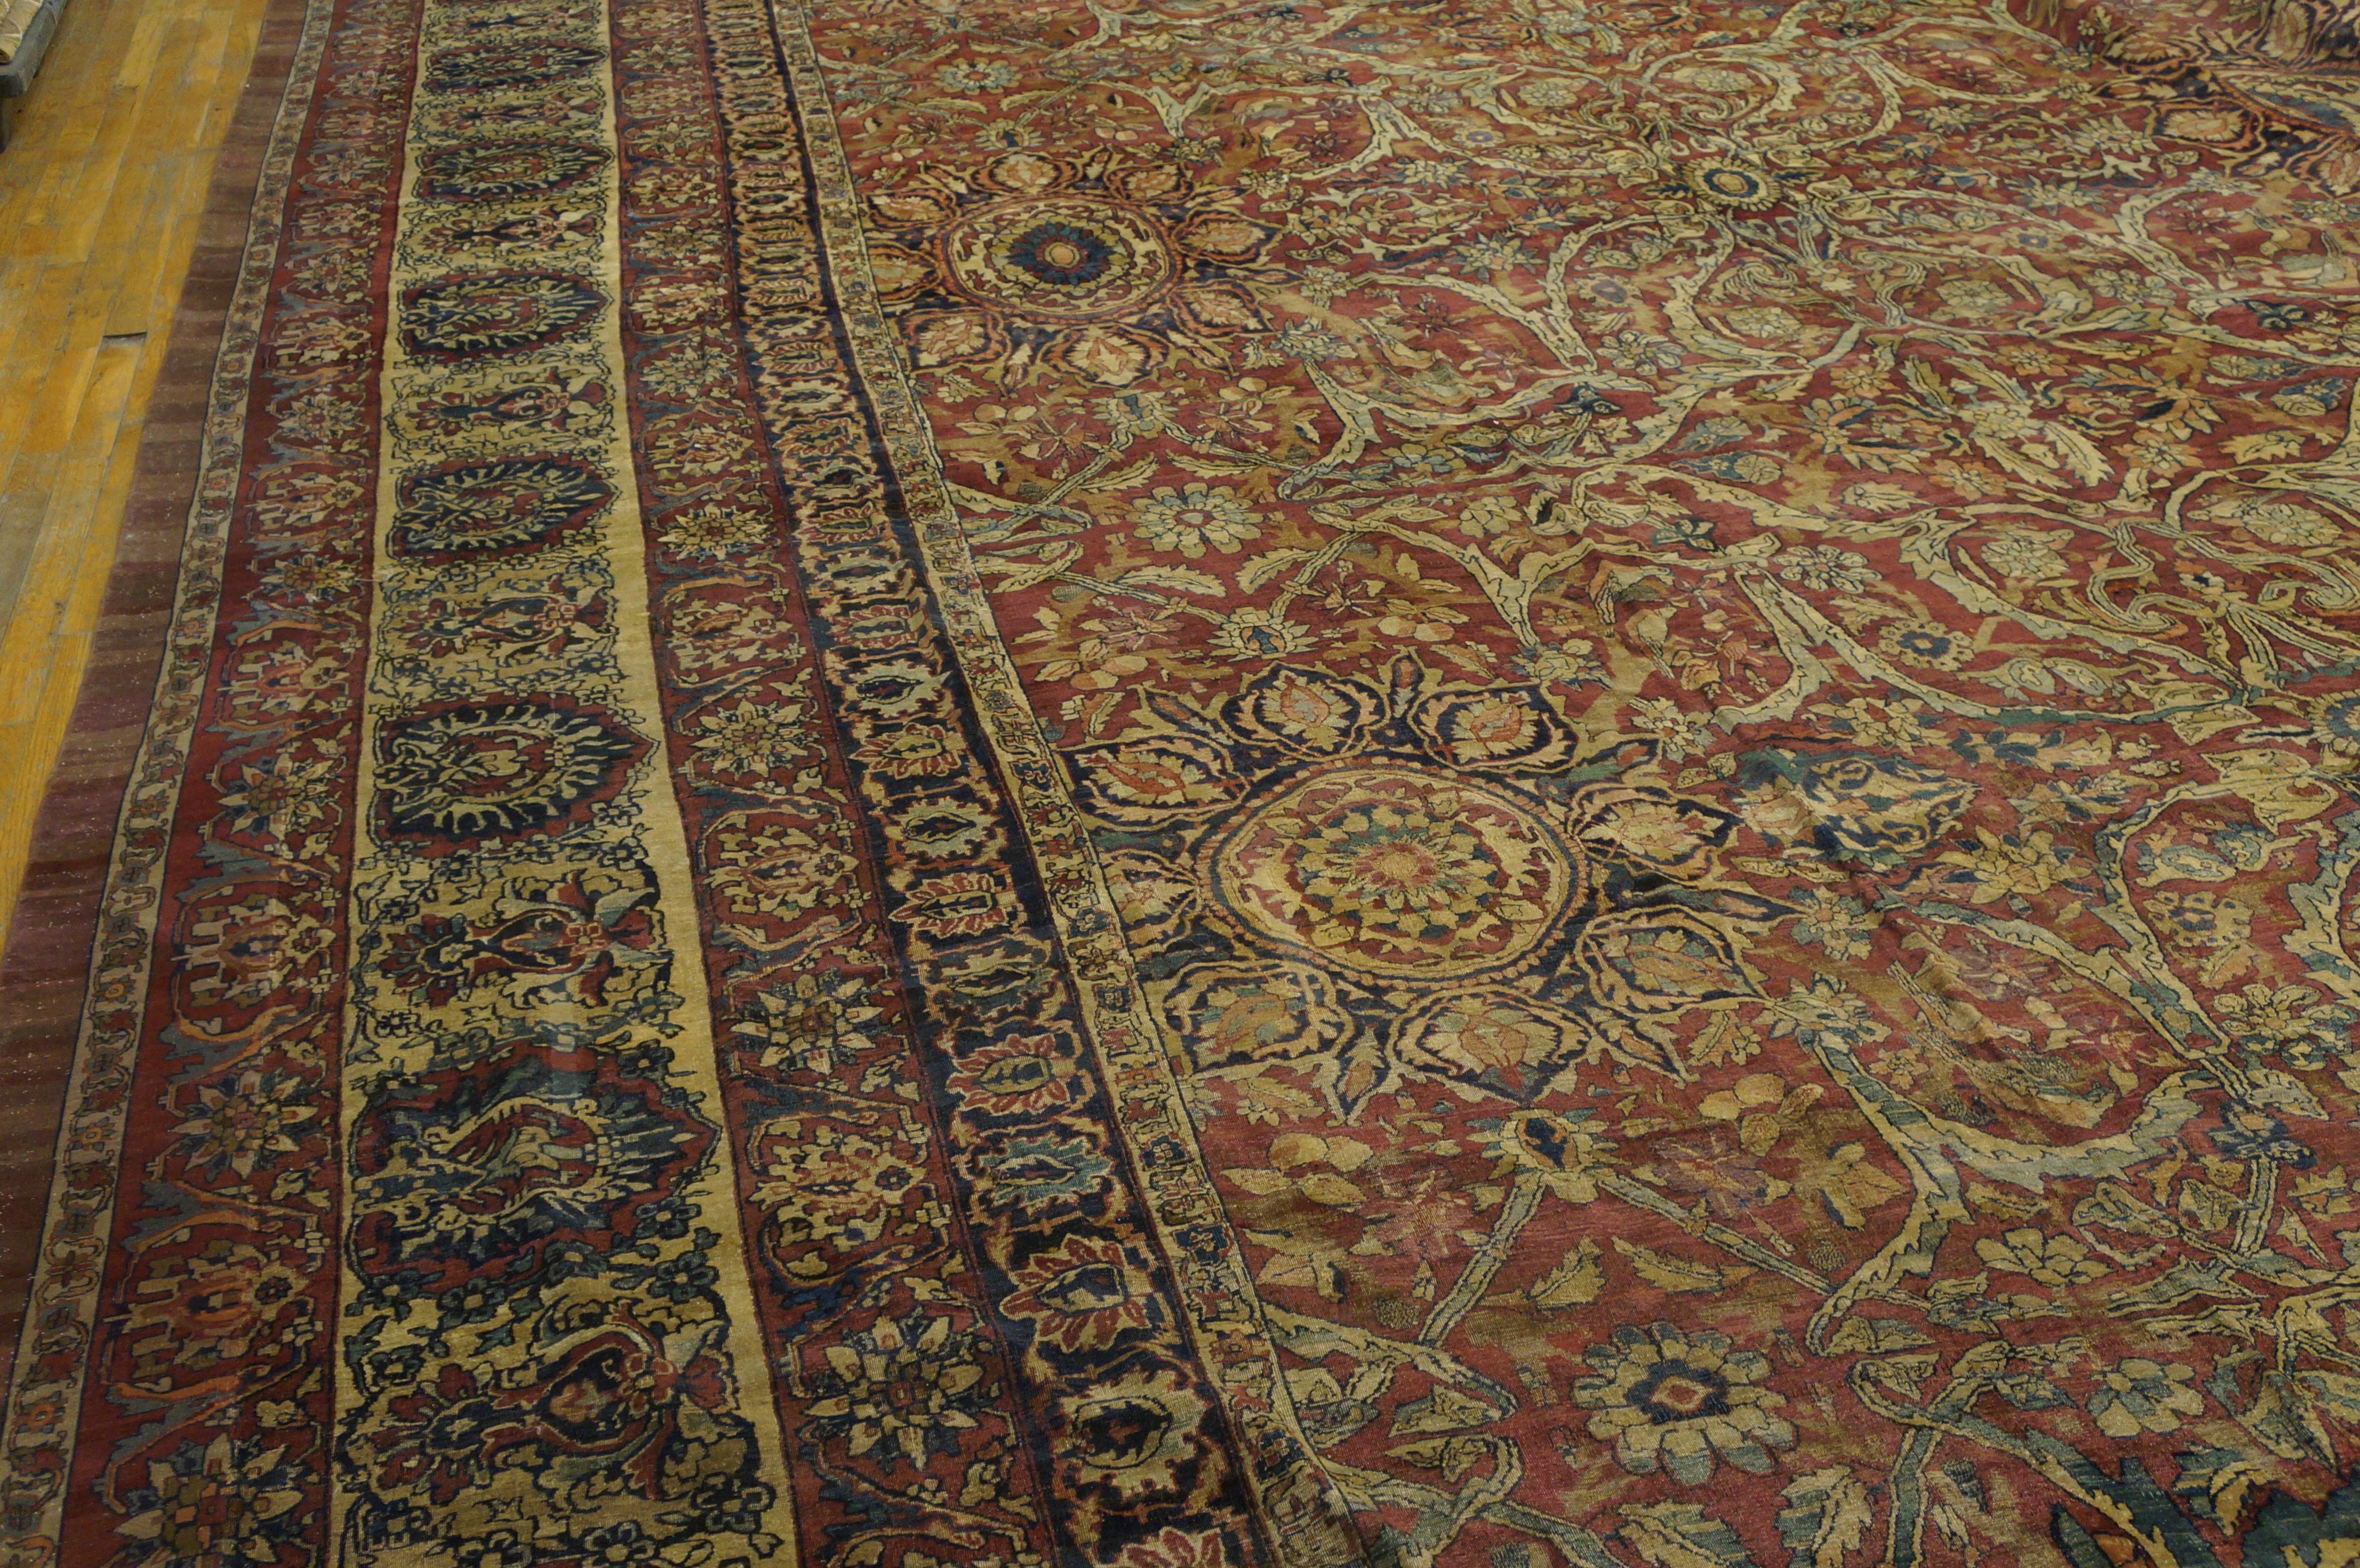 19th Century Persian Kerman Laver Carpet ( 21' x 28' - 640 x 853 ) In Good Condition For Sale In New York, NY